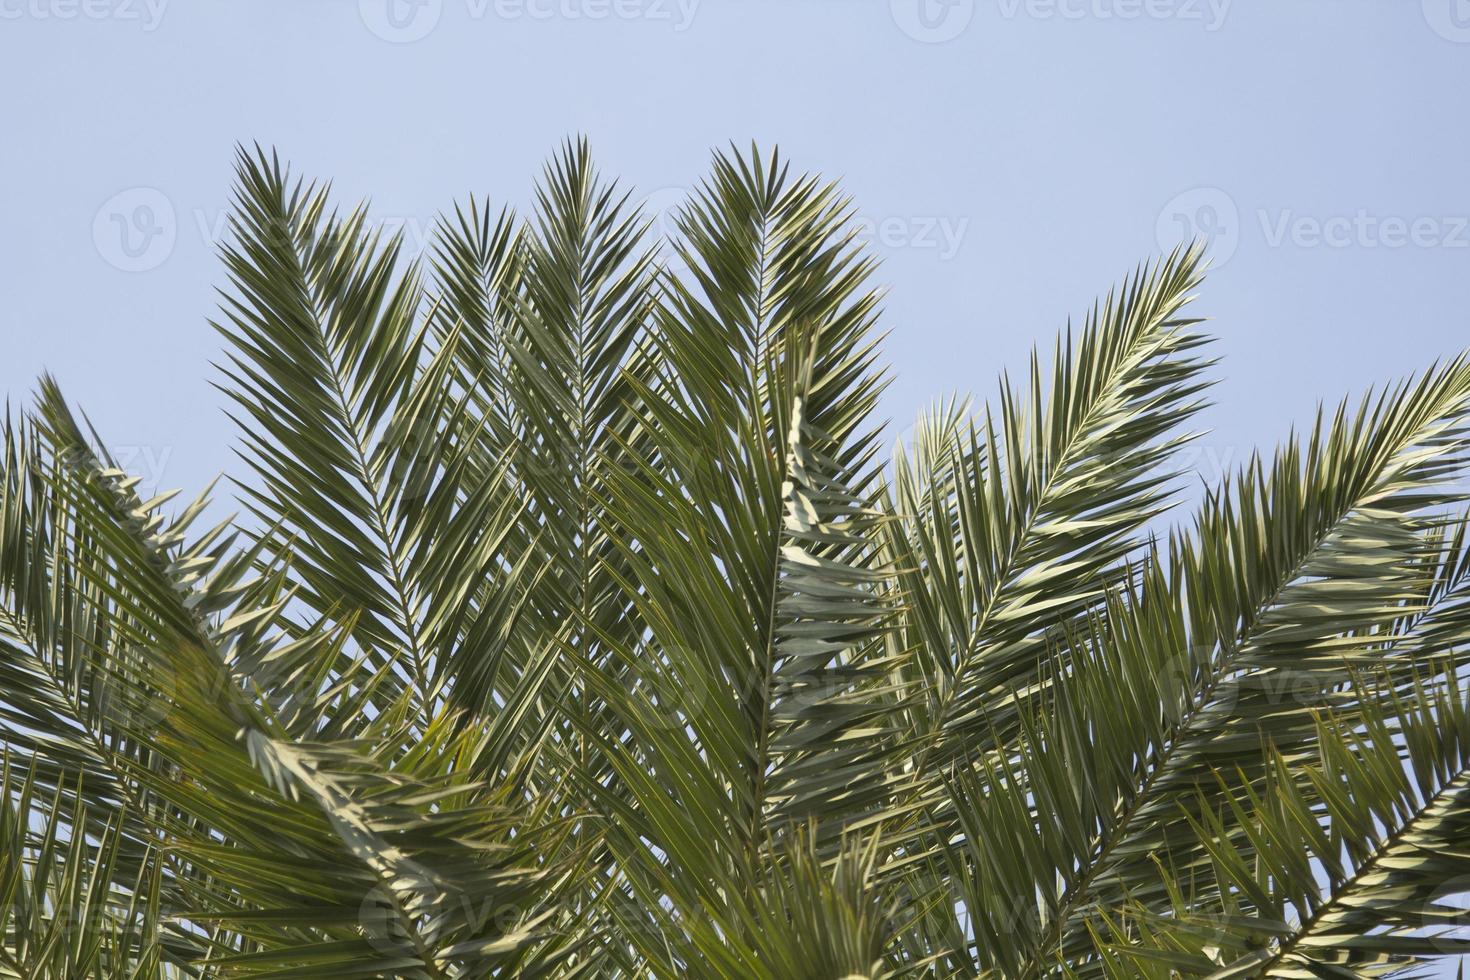 Leaves of palm trees are blowing in the summer breeze. In the evening, the atmosphere is shady and romantic, allowing you to see the delicate nature of the palm trees. photo